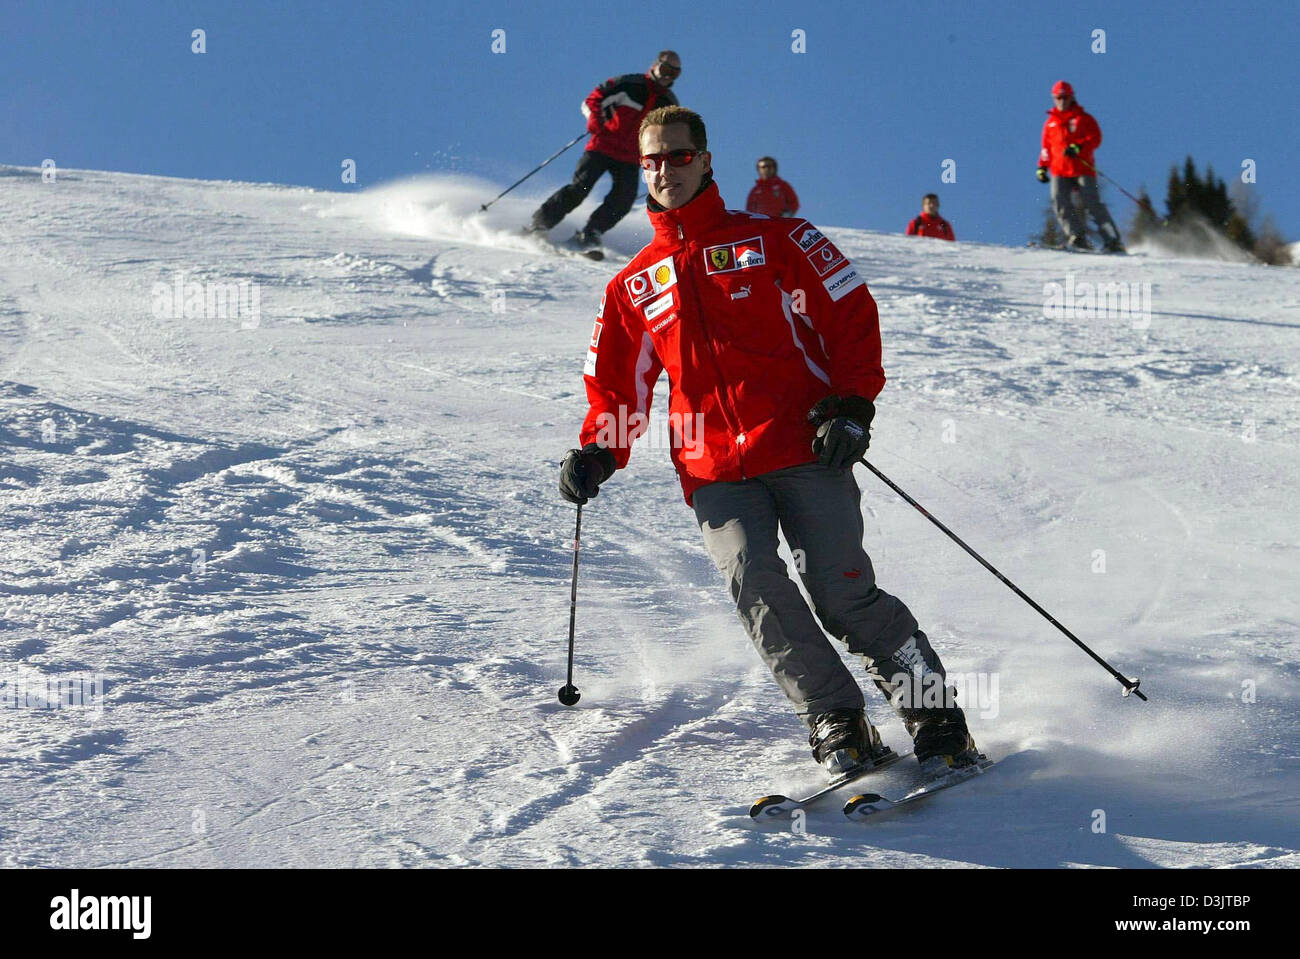 (dpa) - Seven time Formula 1 champion Michael Schumacher (team Ferrari) skis down the slopes shortly after arriving in the ski resort of Madonna di Campiglio, Italy, 11 January 2005. The Ferrari team got together for its traditional ski vacation in the Italian Alps. (ITALY OUT) Stock Photo